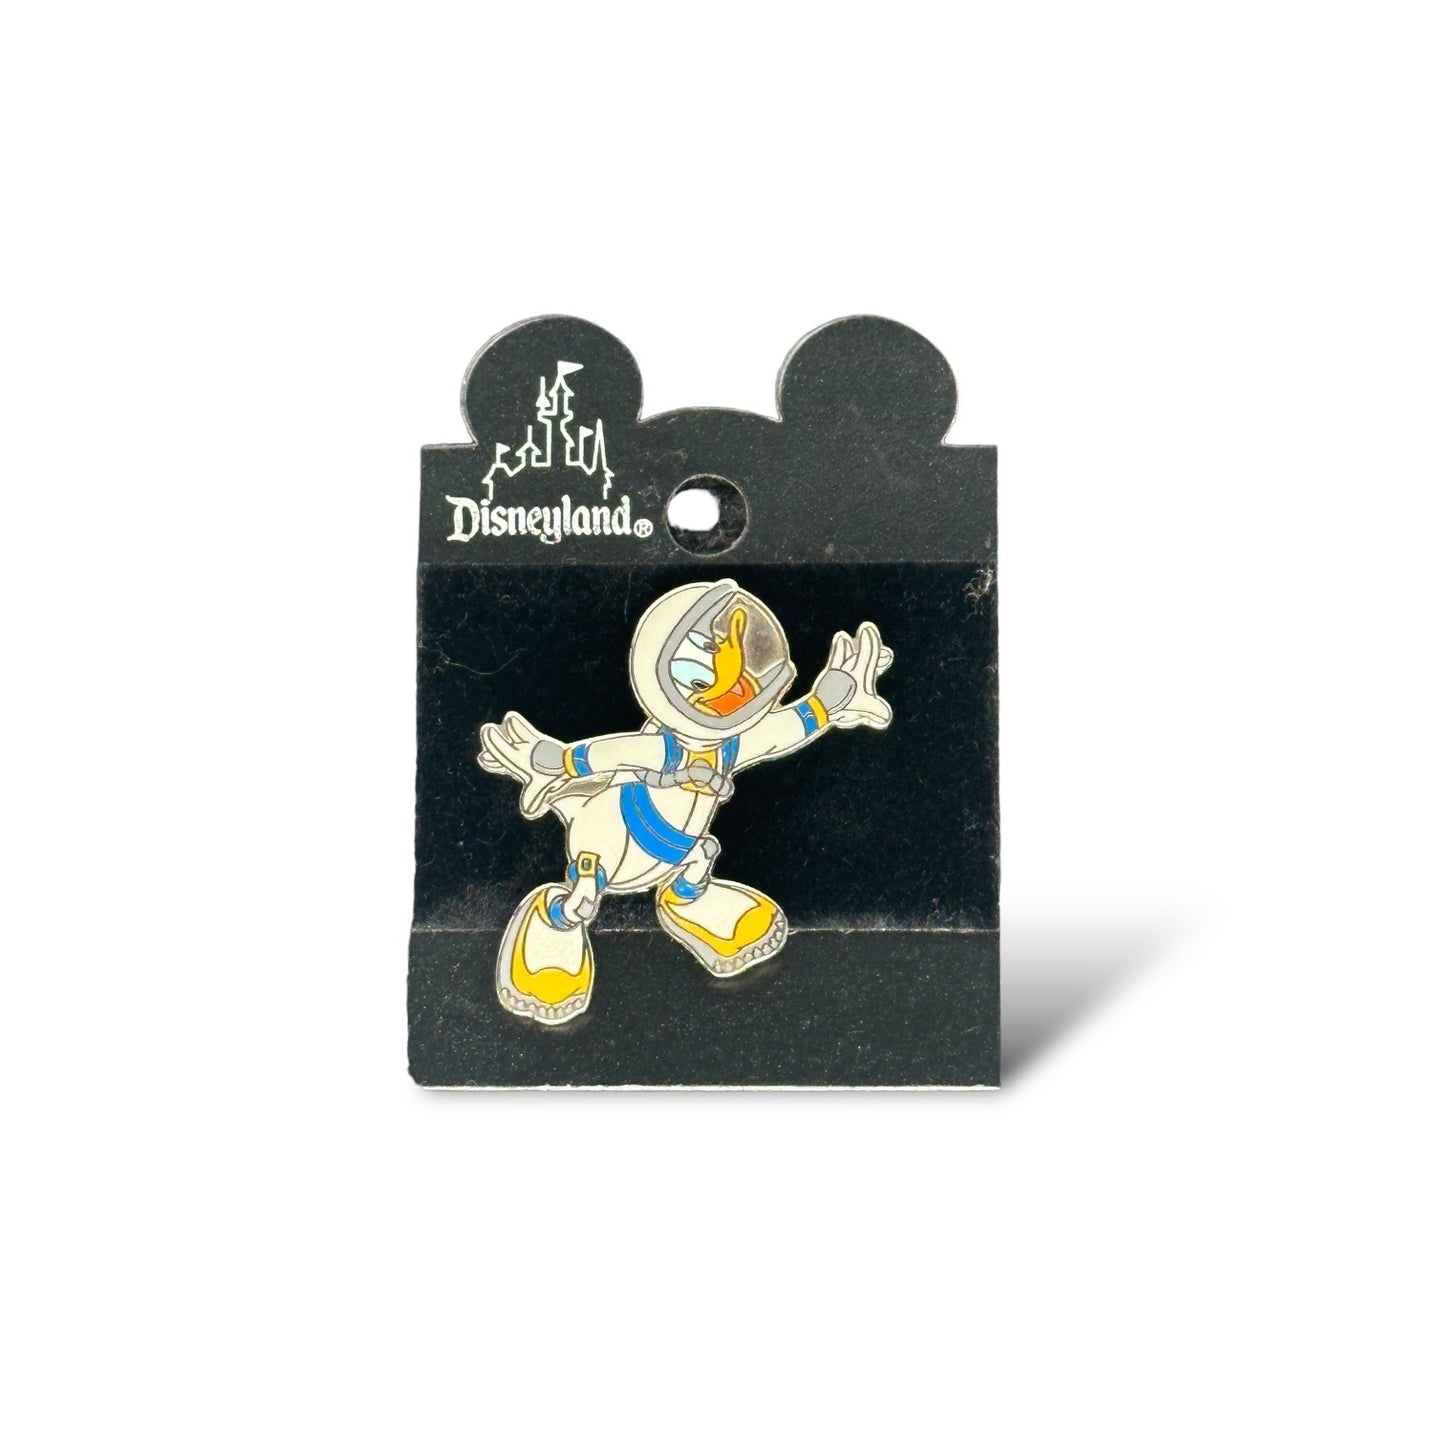 DLR 1998 Tomorrowland Grand Re-Opening Astronaut in Space Suit Donald Pin